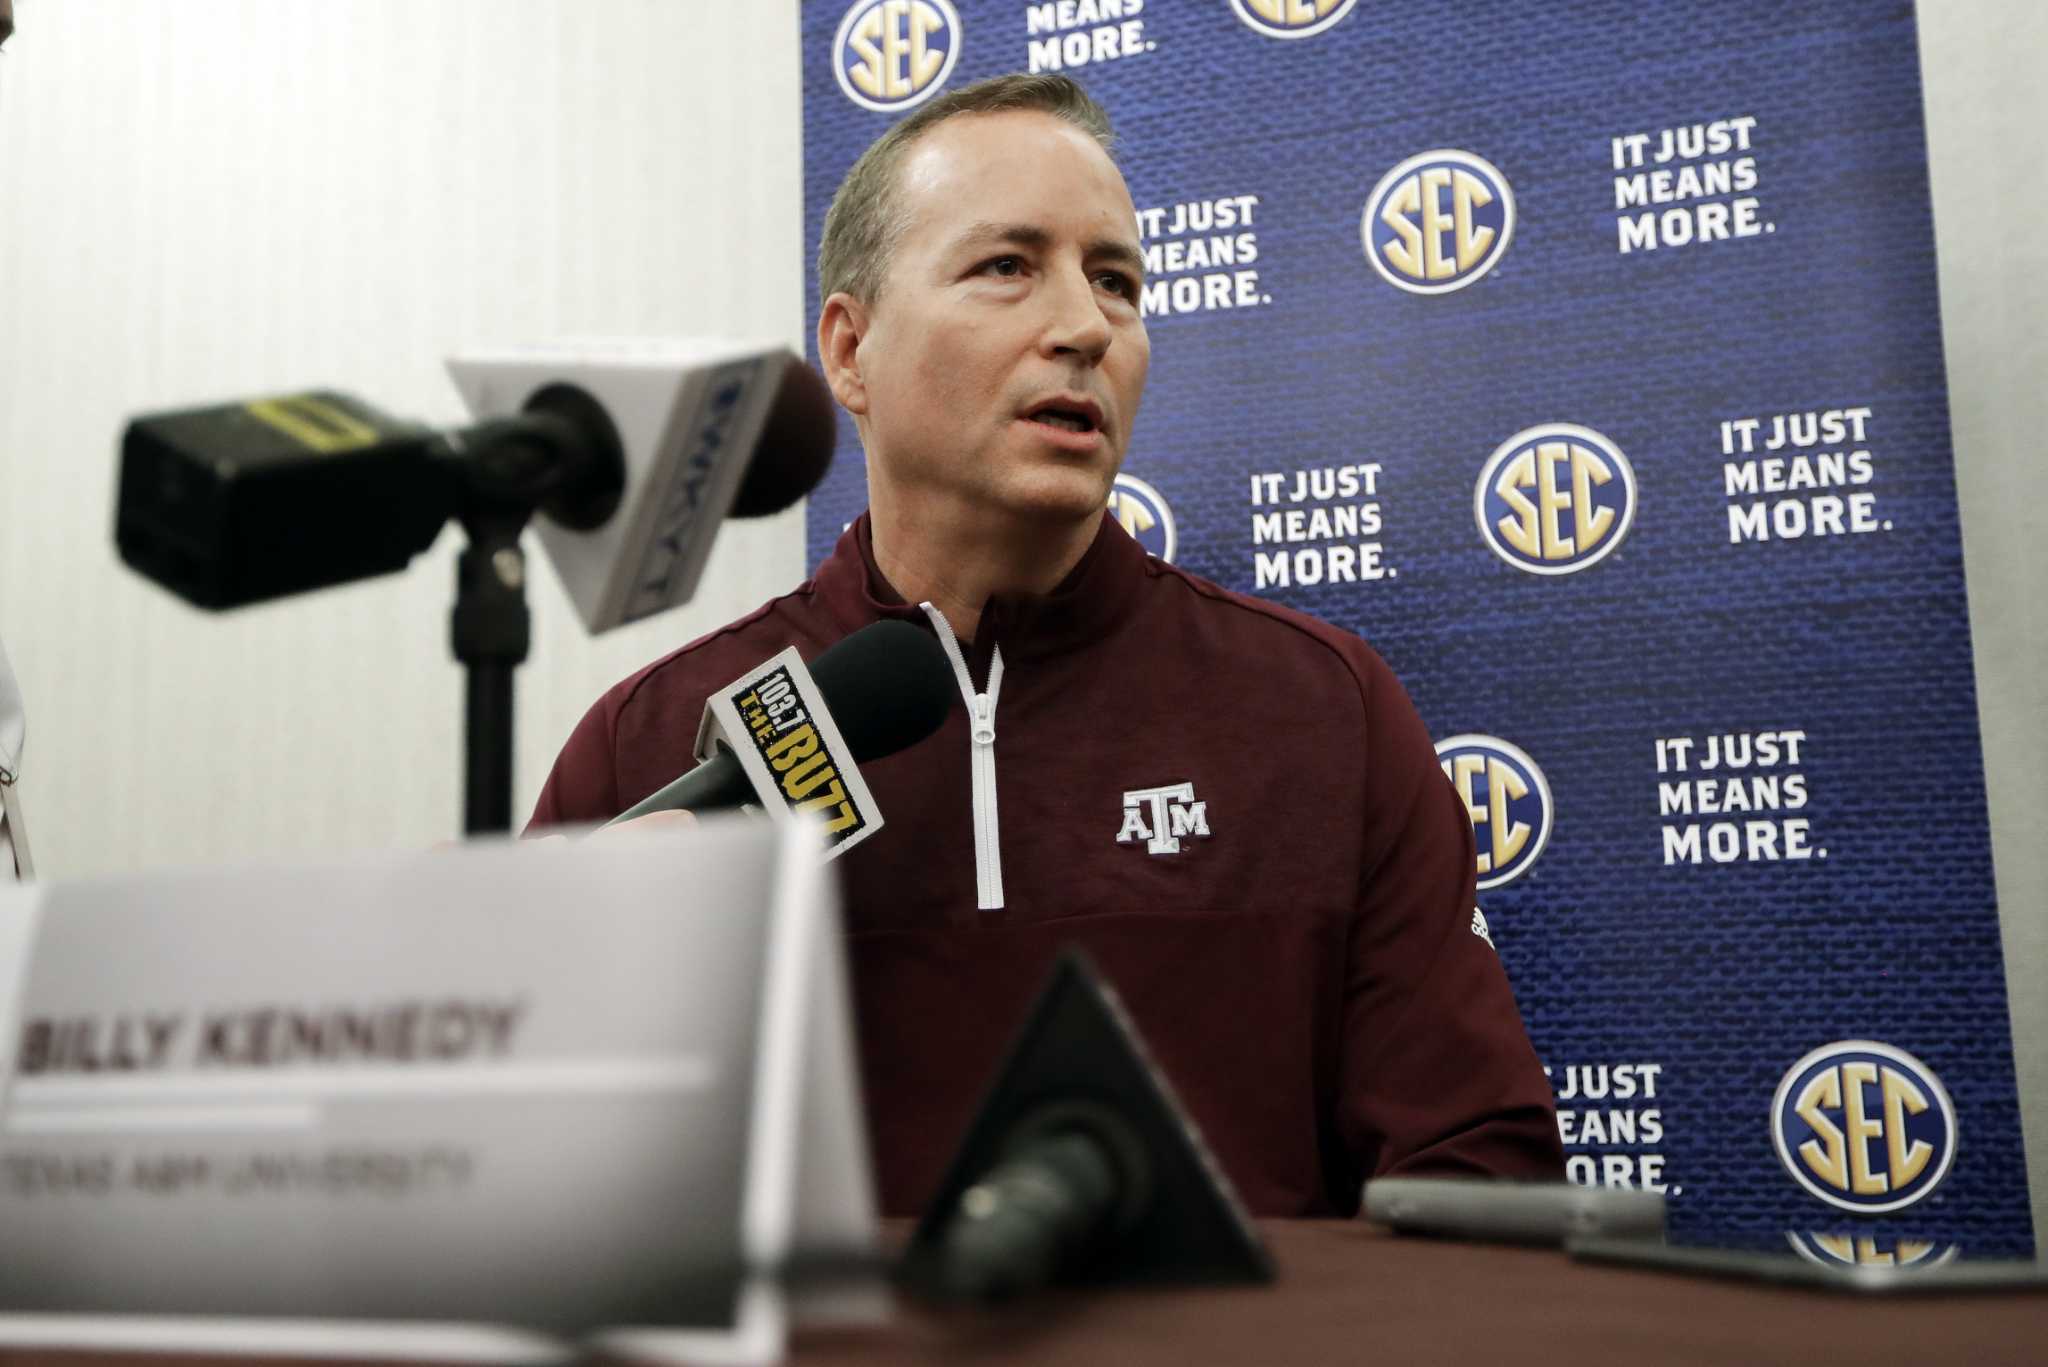 Texas A&M wants to finish conference schedule strong